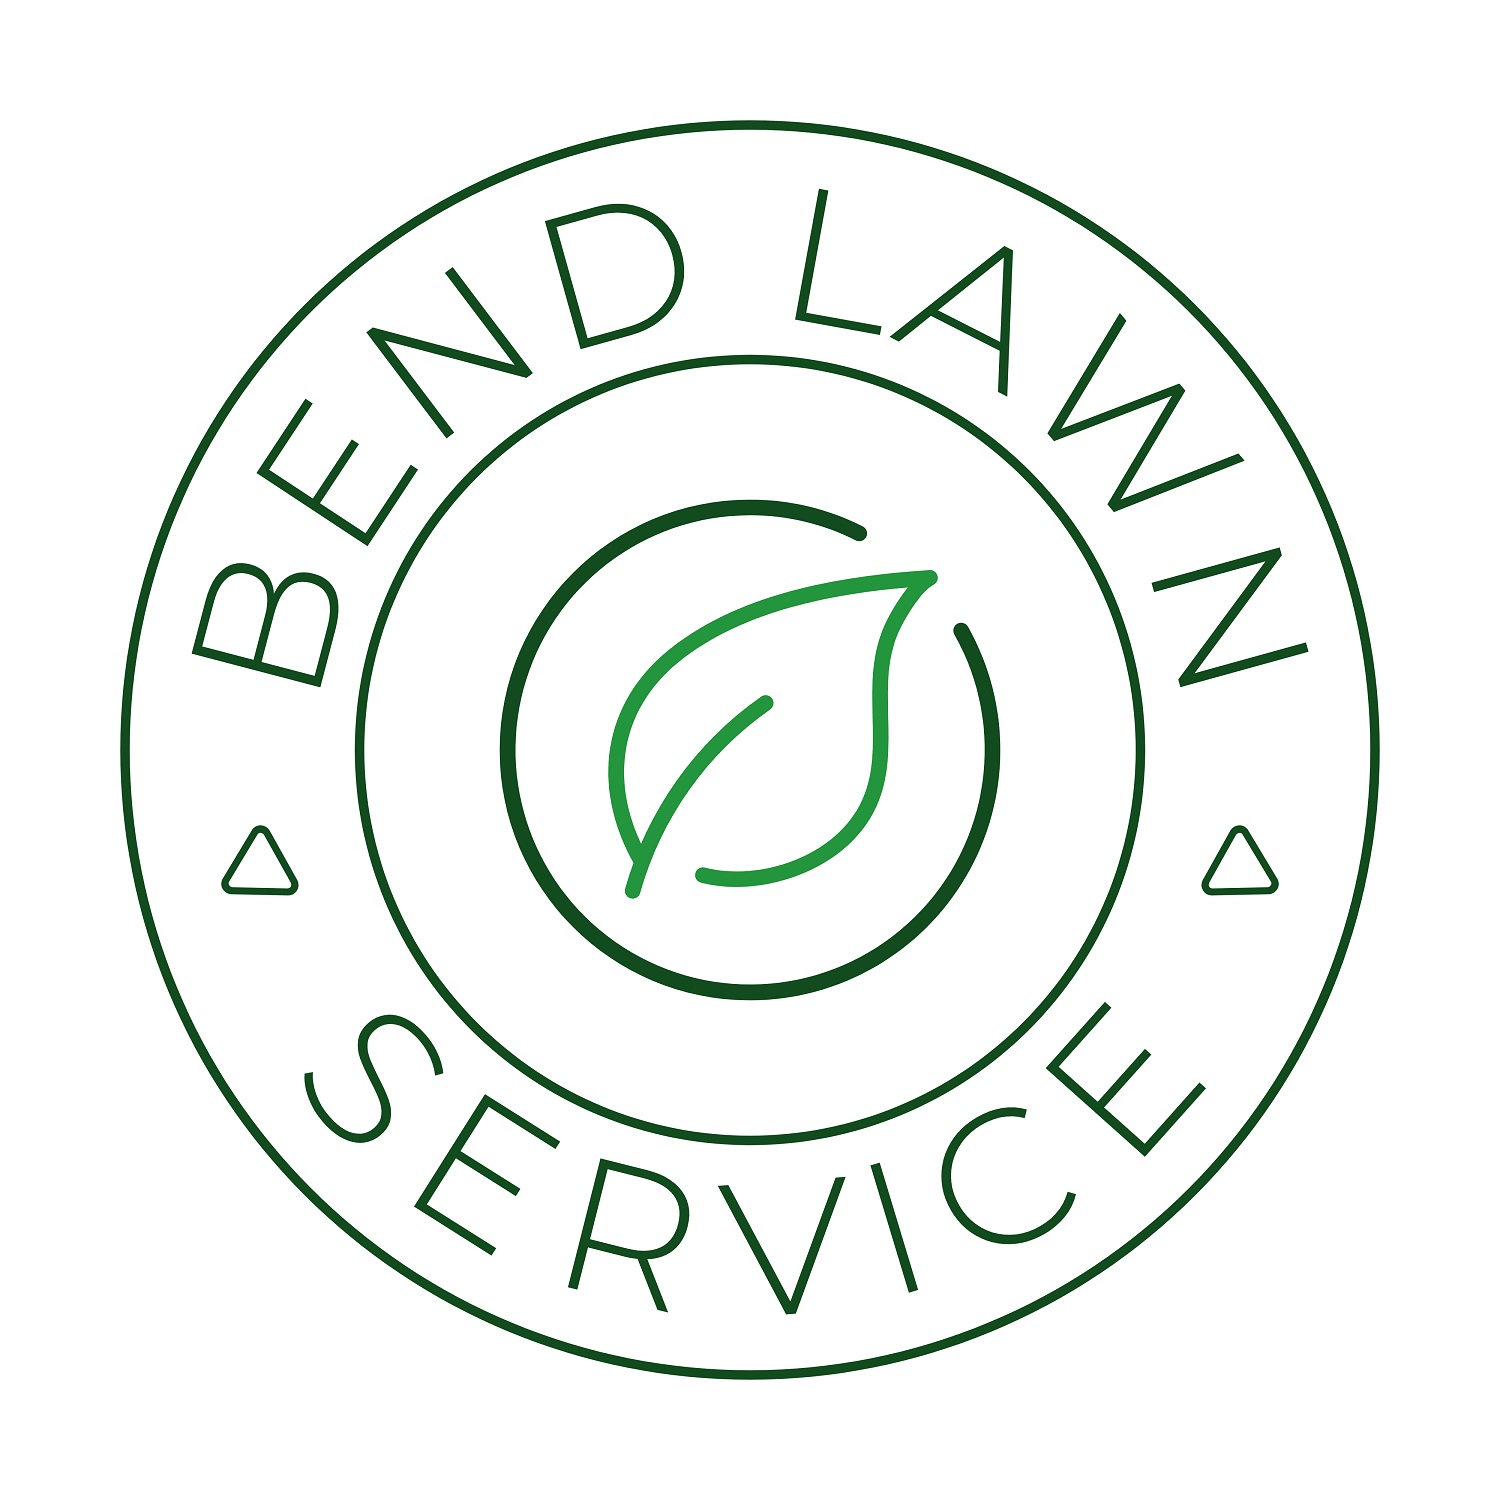 Bend Oregon Lawn Service Lawn Care Maintenance and Cleanups